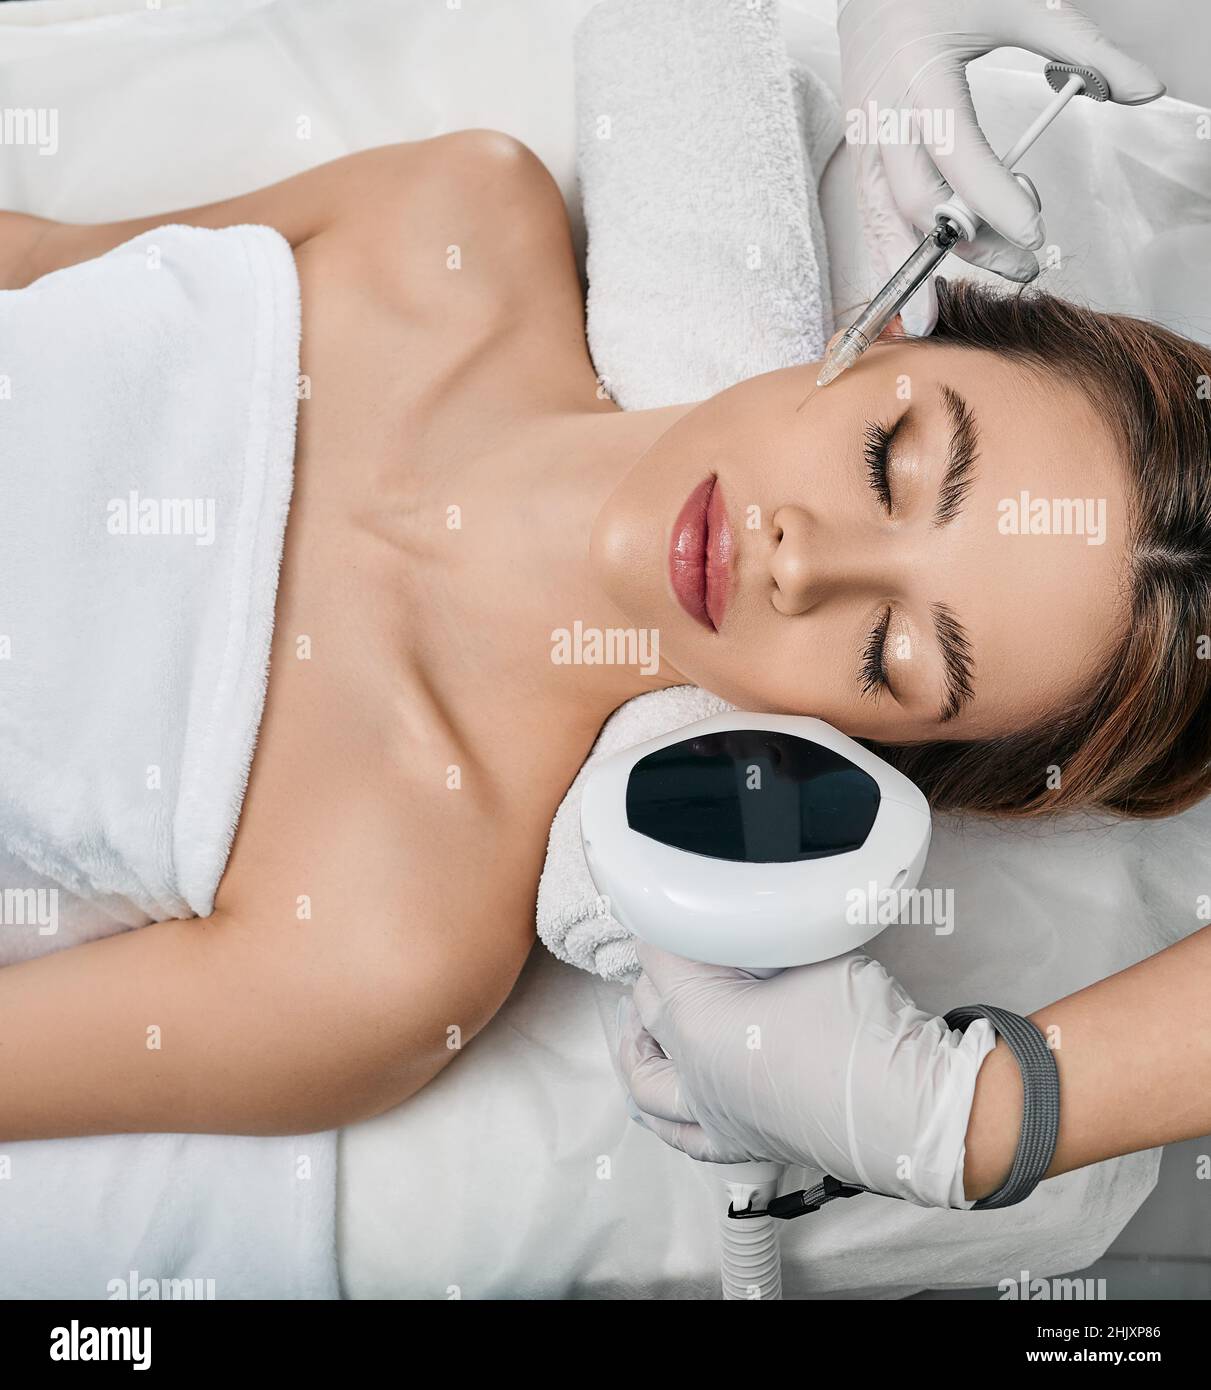 Cosmetological facial care. Cosmetologist illustrating facial treatments such as beauty injections and photorejuvenation Lumecca IPL Stock Photo